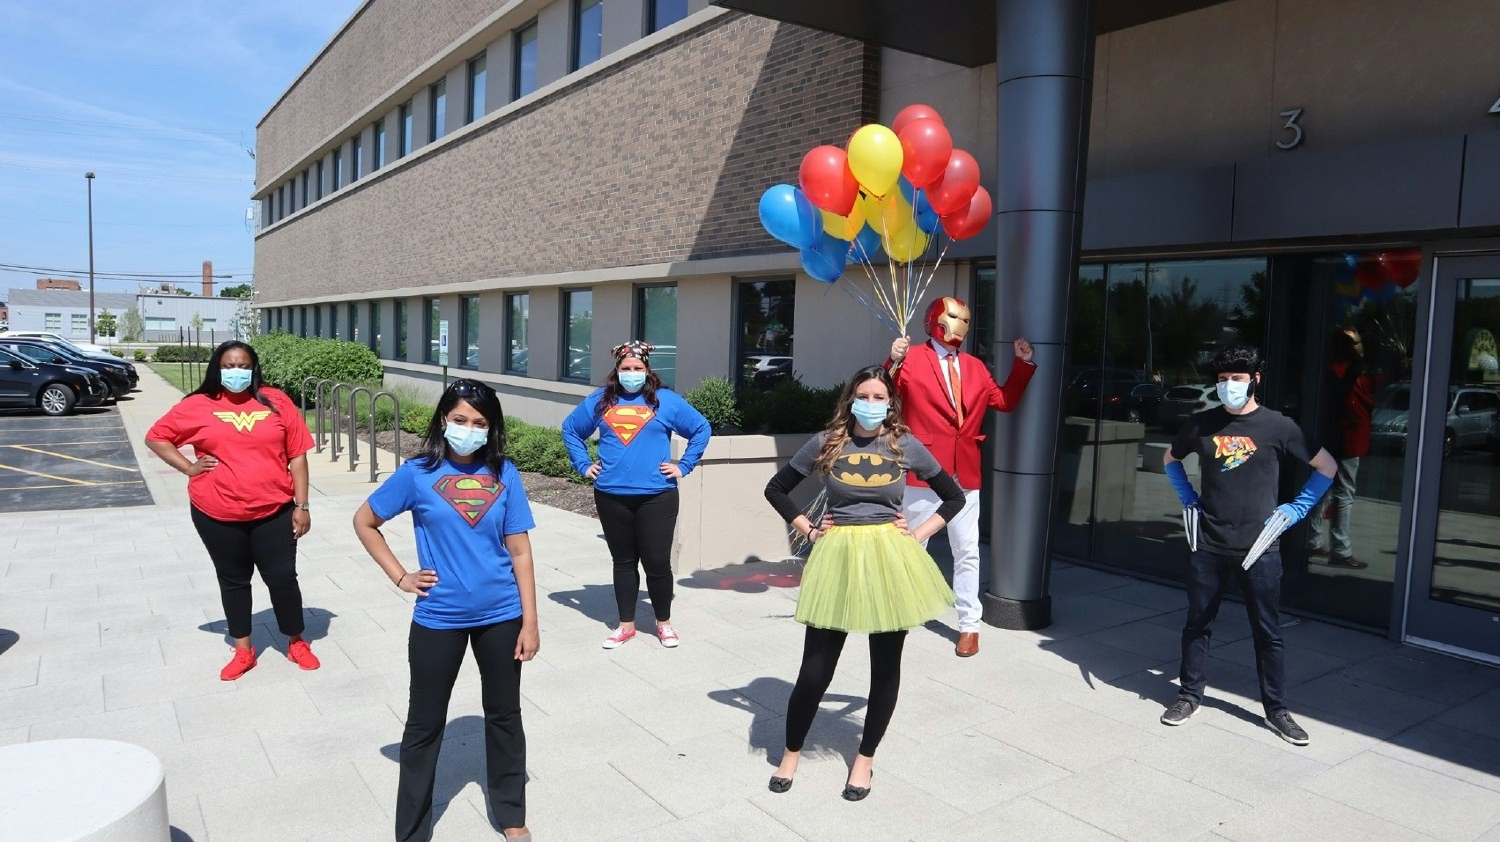 Yearly - since the pandemic, our team celebrates Legacy's annual Superhero day, dressing as their favorite superhero.